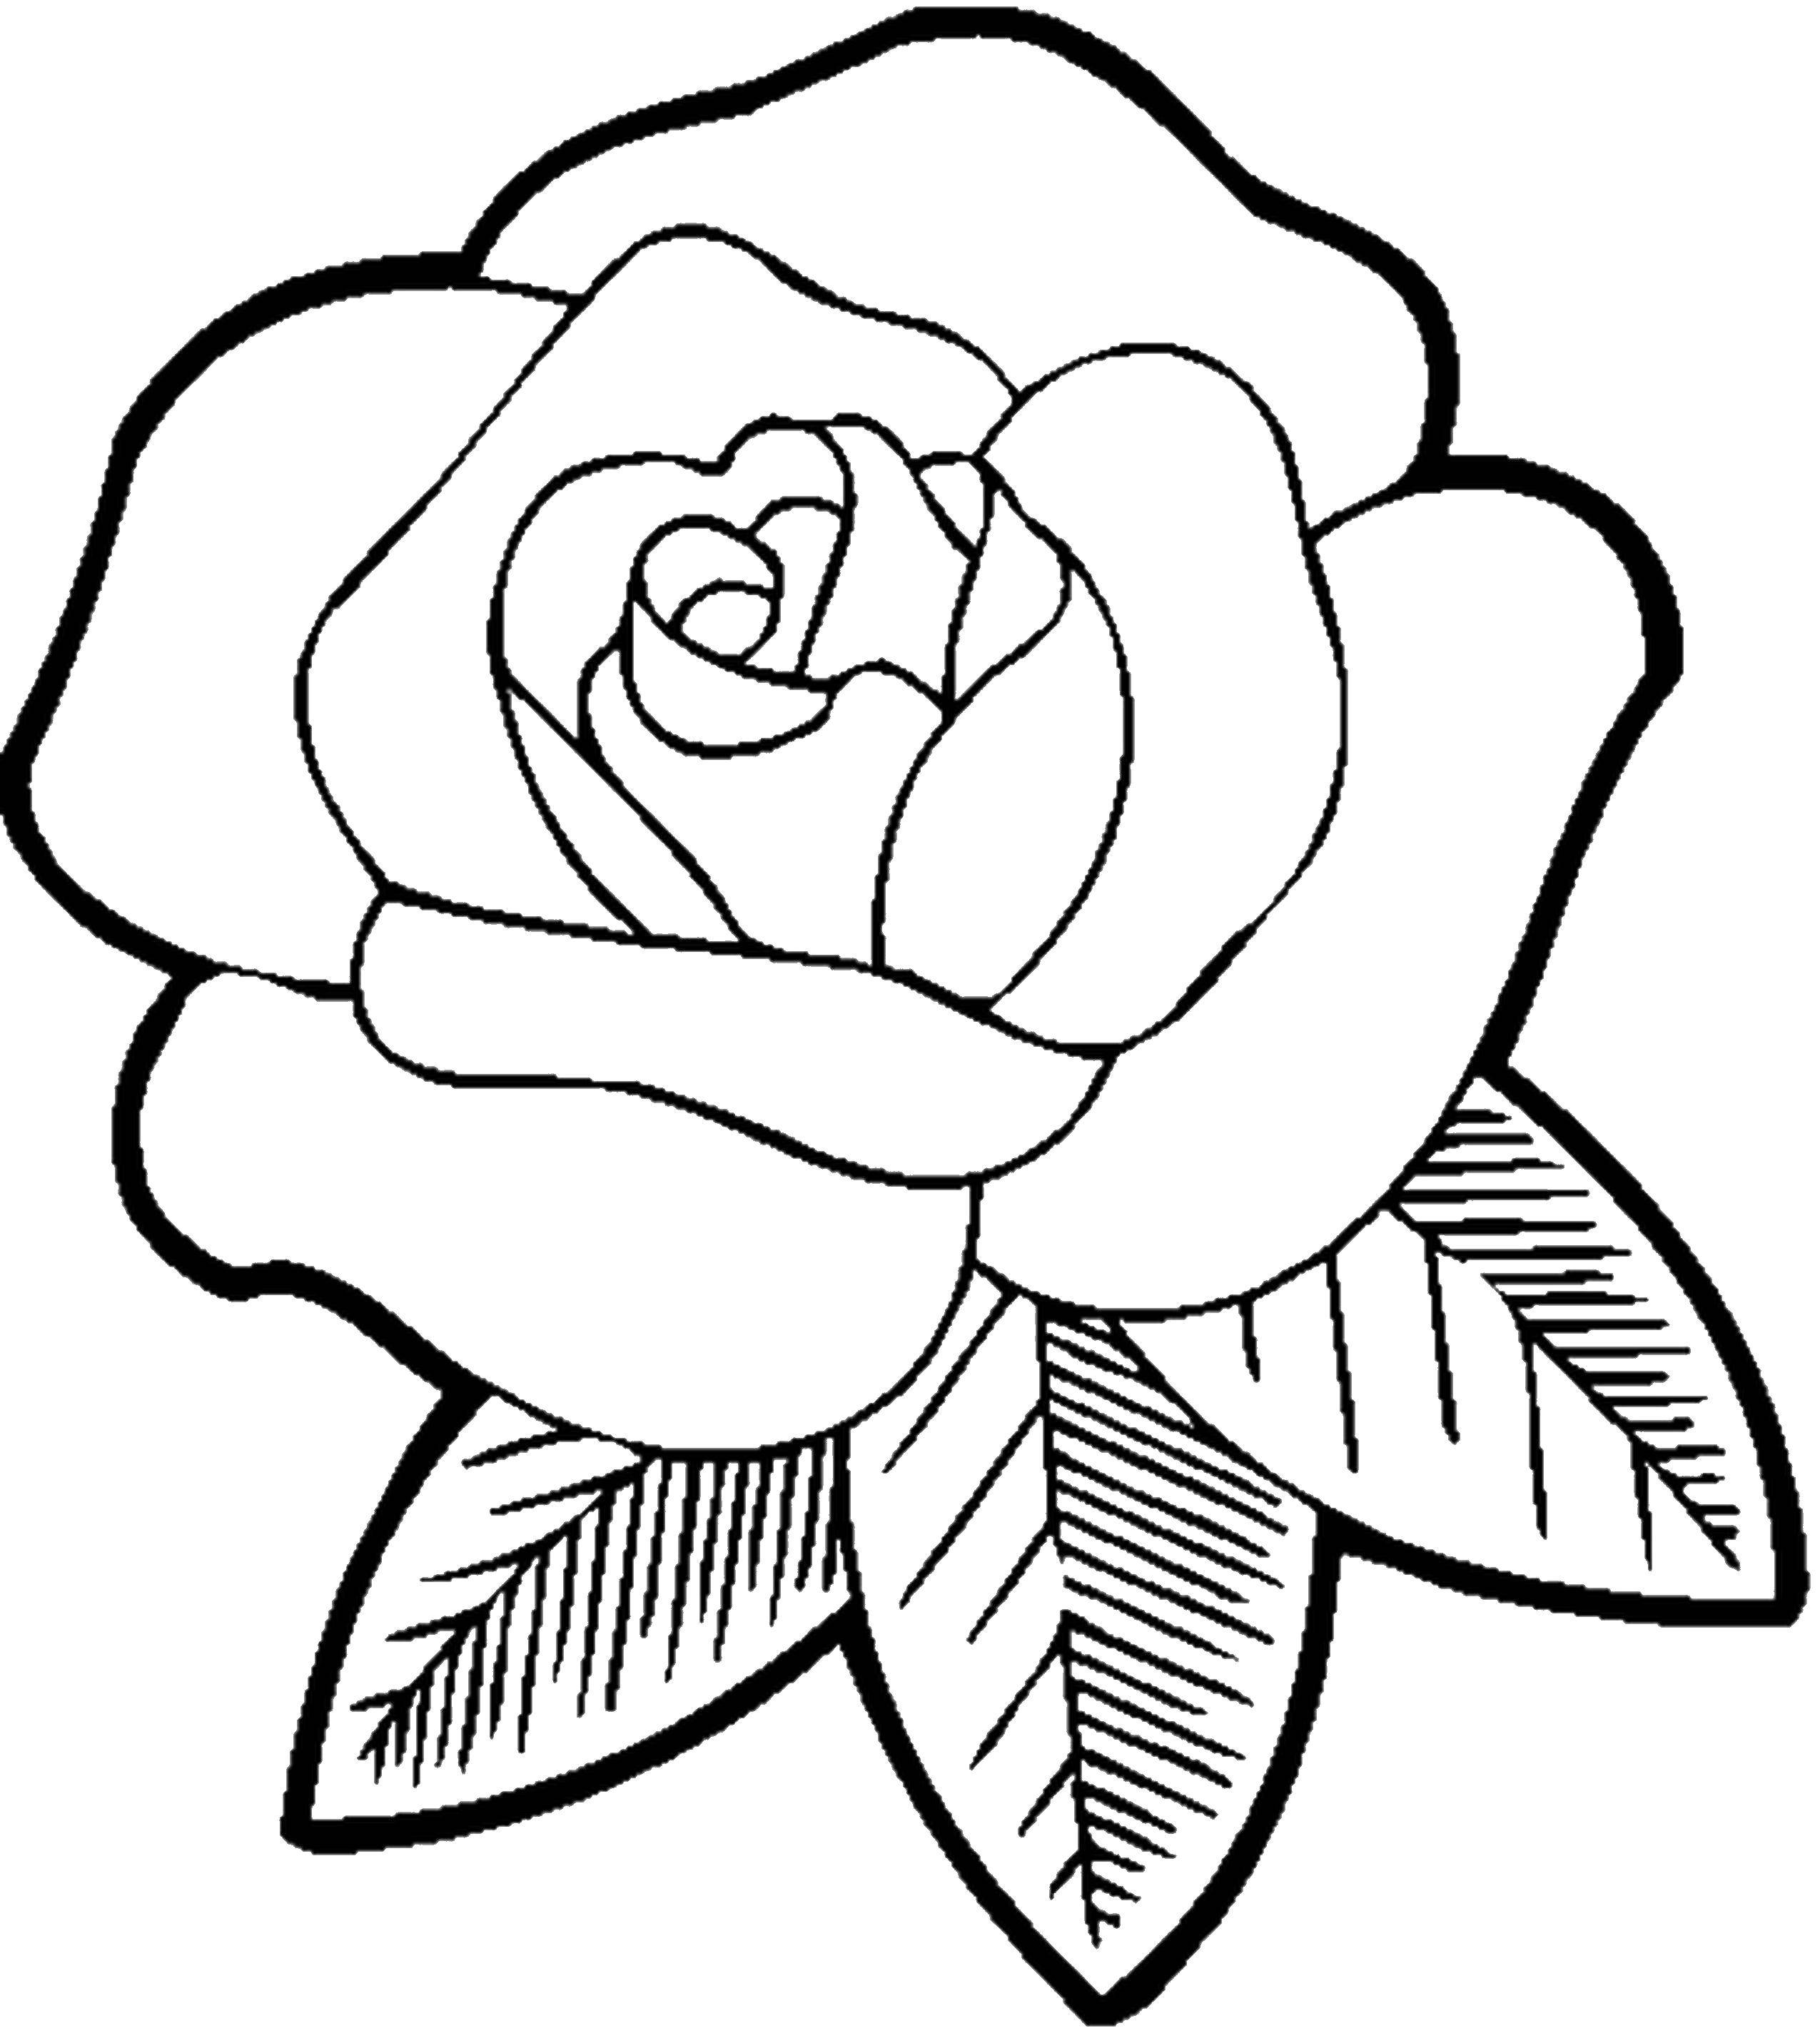 Coloring Rose. Category flowers. Tags:  rose, flowers.